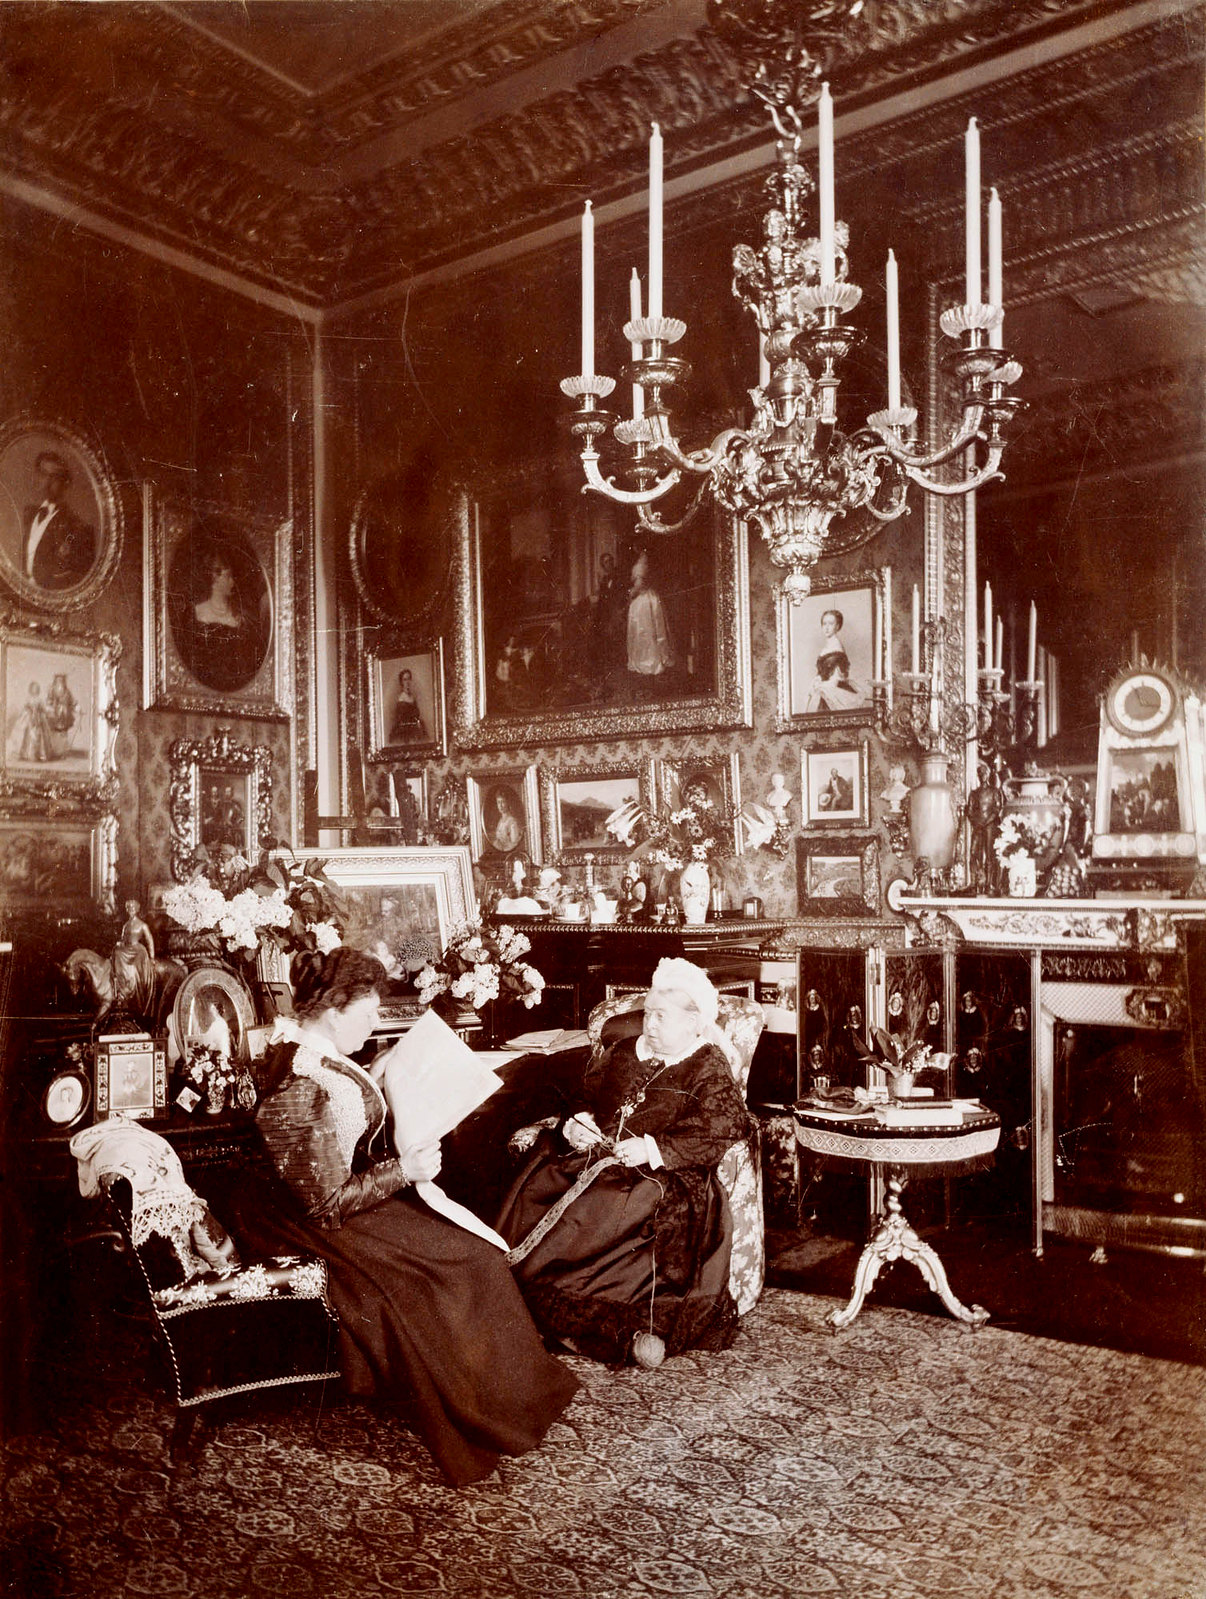 Queen Victoria and Princess Beatrice in the Queen's Sitting Room in 1895, photographed by Mary Steen